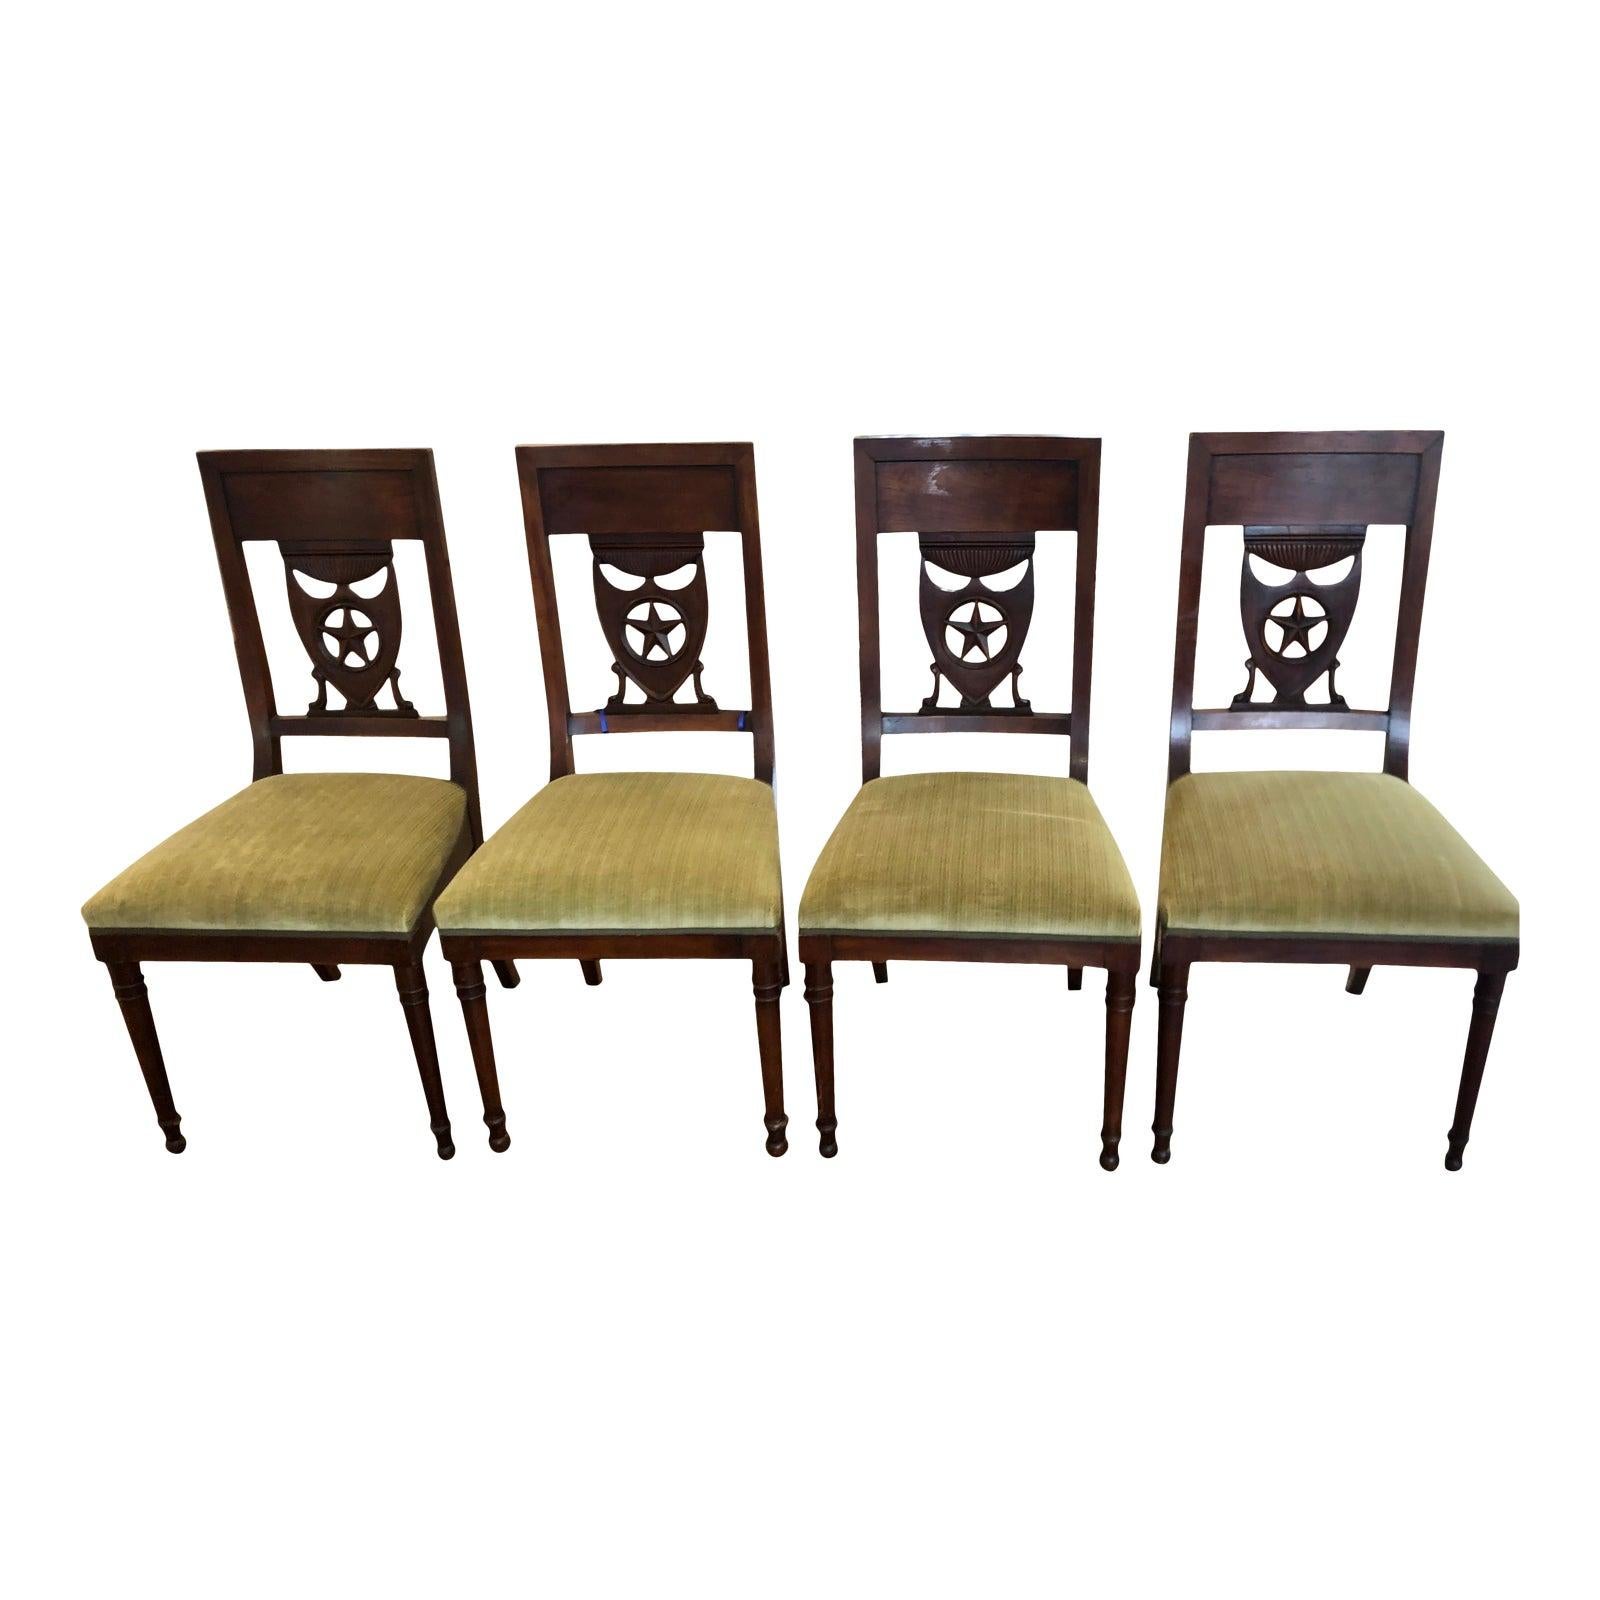 Antique 19th C Empire star & shield coat of arms dining chairs
Priced each.

Additional information:
Materials: Mahogany
Color: Olive
Period: 19th Century
Styles: Empire
Number of Seats: 1
Item Type: Vintage, Antique or